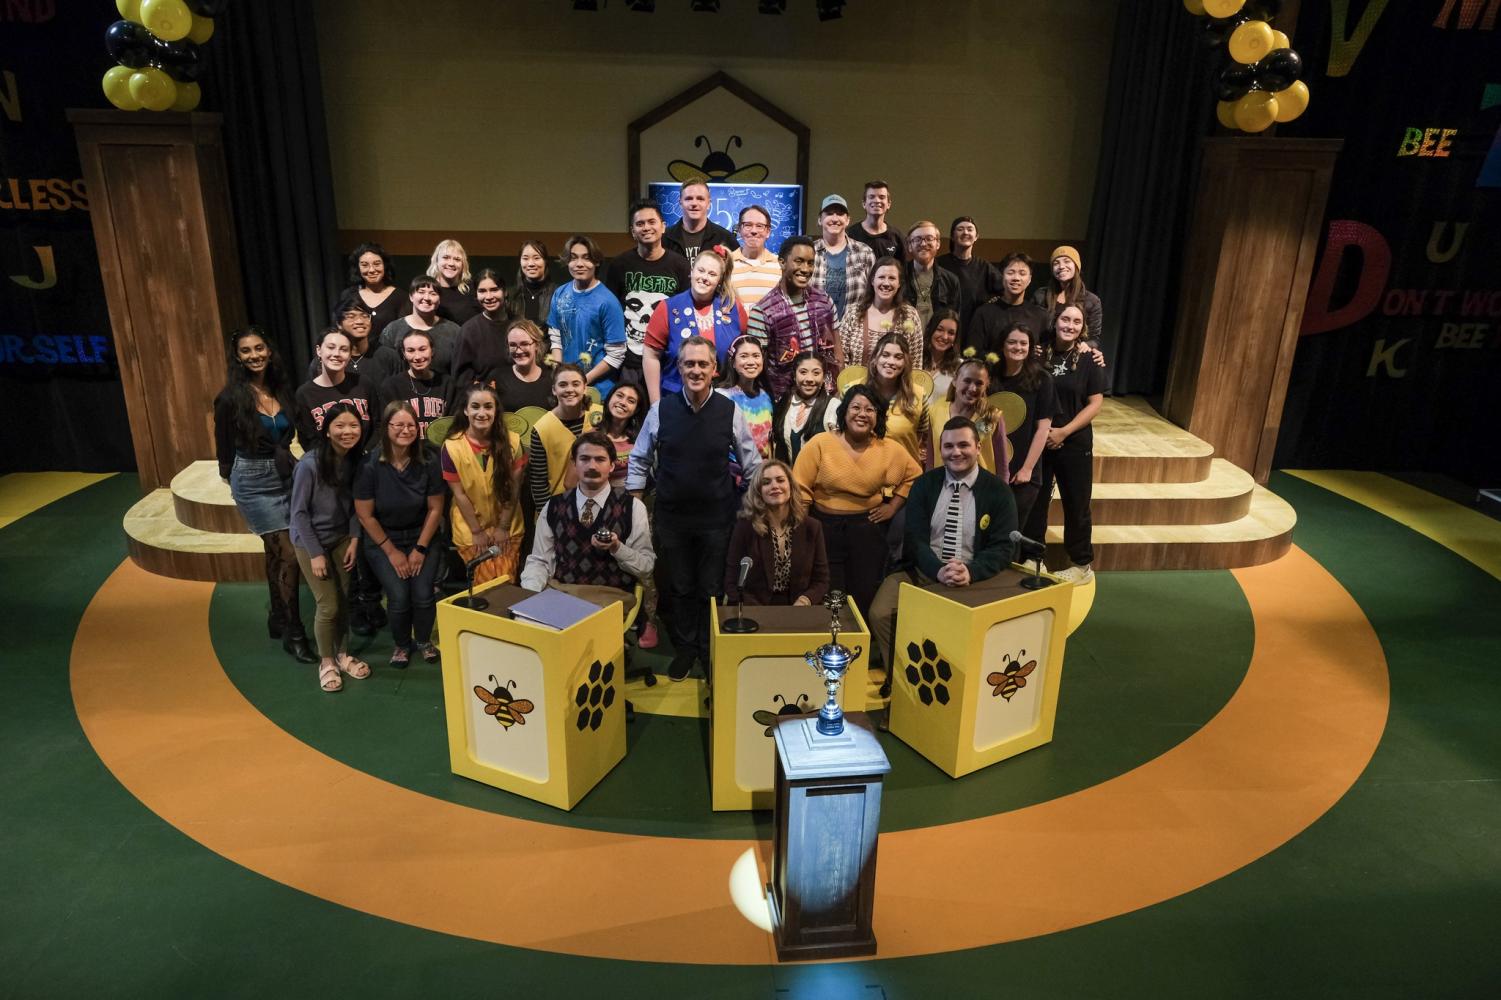 Cast and crew of The 25th Annual Putnam County Spelling Bee.